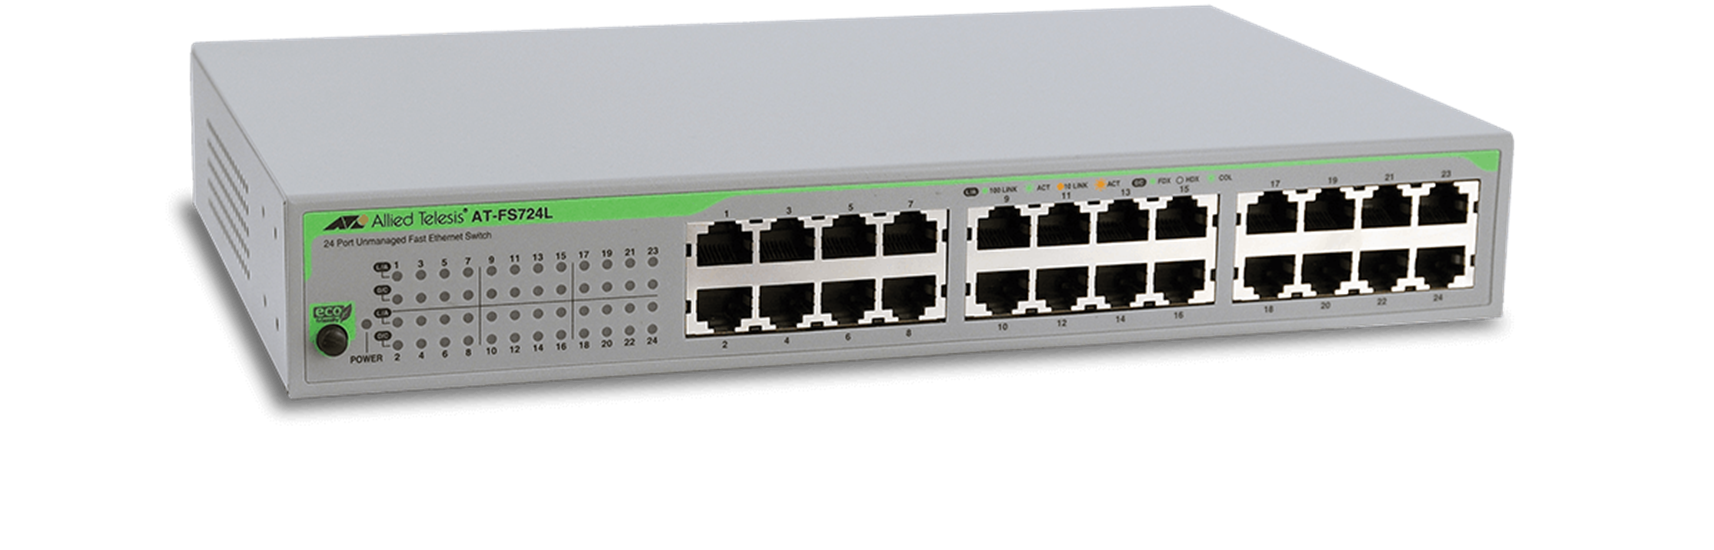 AT-FS710 Series - Unmanaged Fast Ethernet Switch